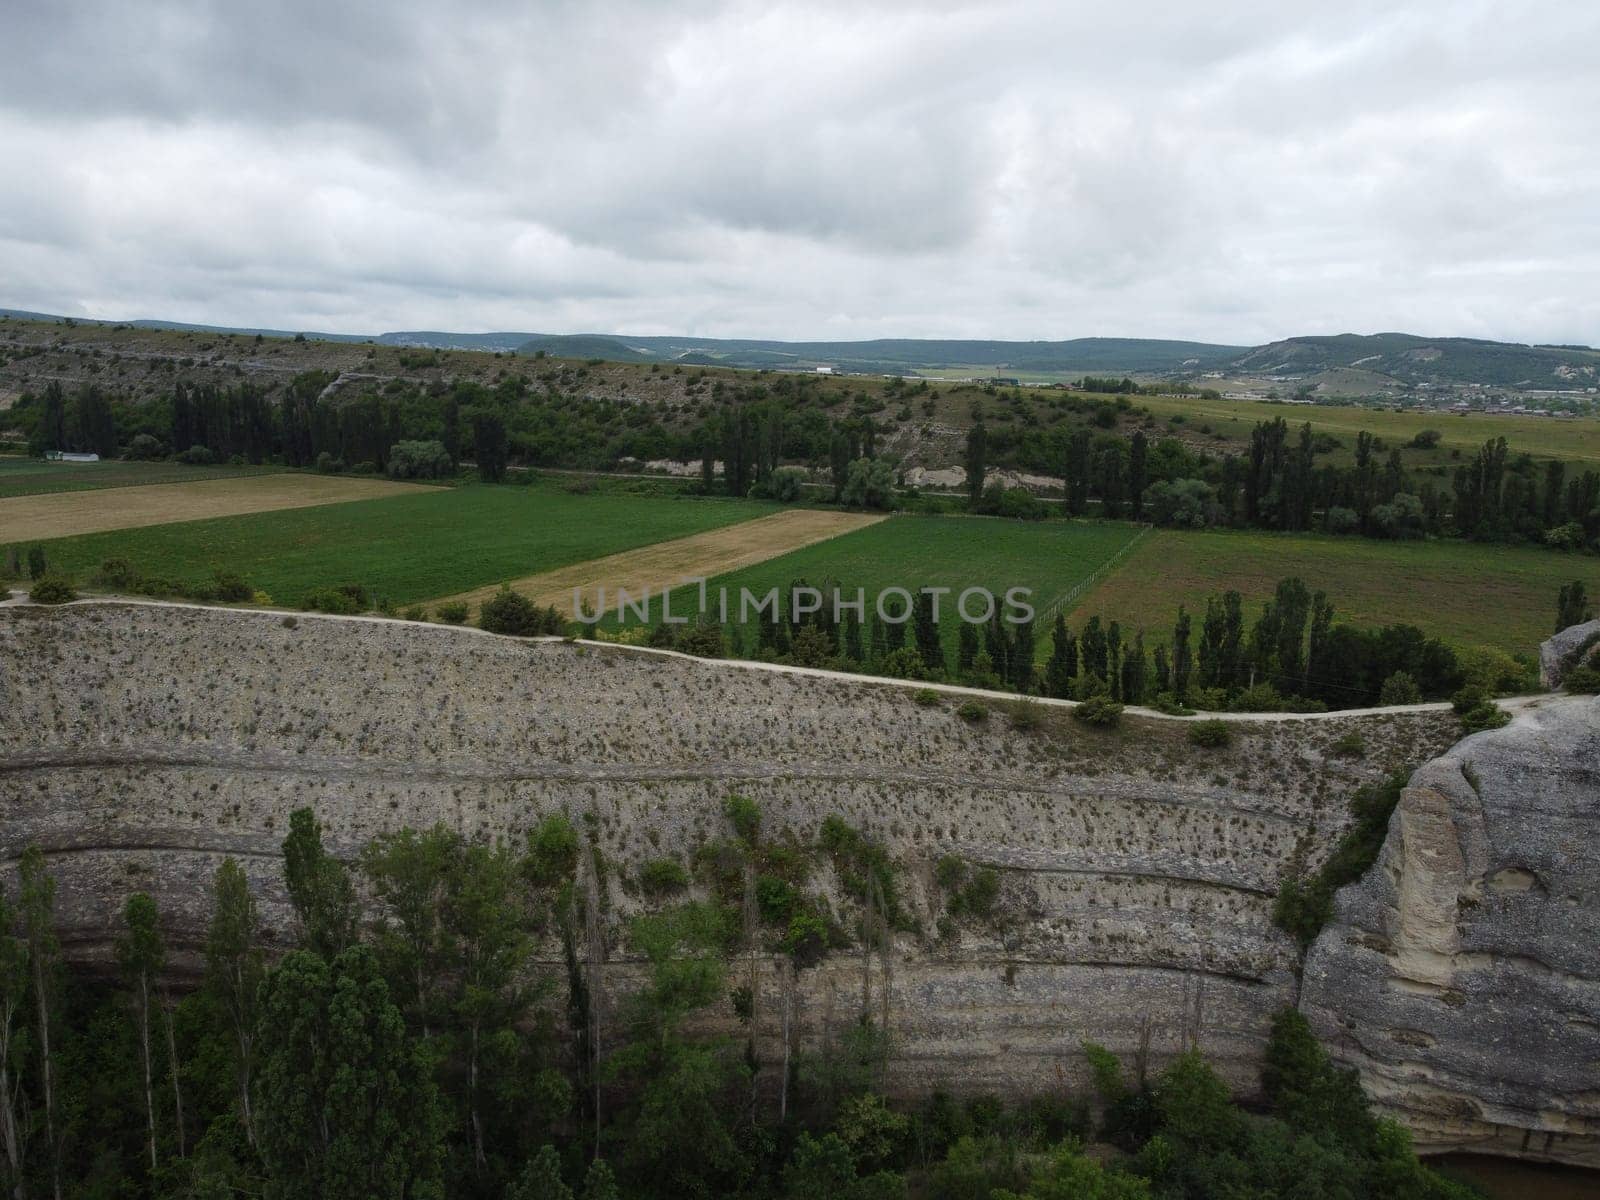 Aerial viev of lush green farm field with rocky cliffs in the distance. beauty of rural areas and the agricultural process. by panophotograph